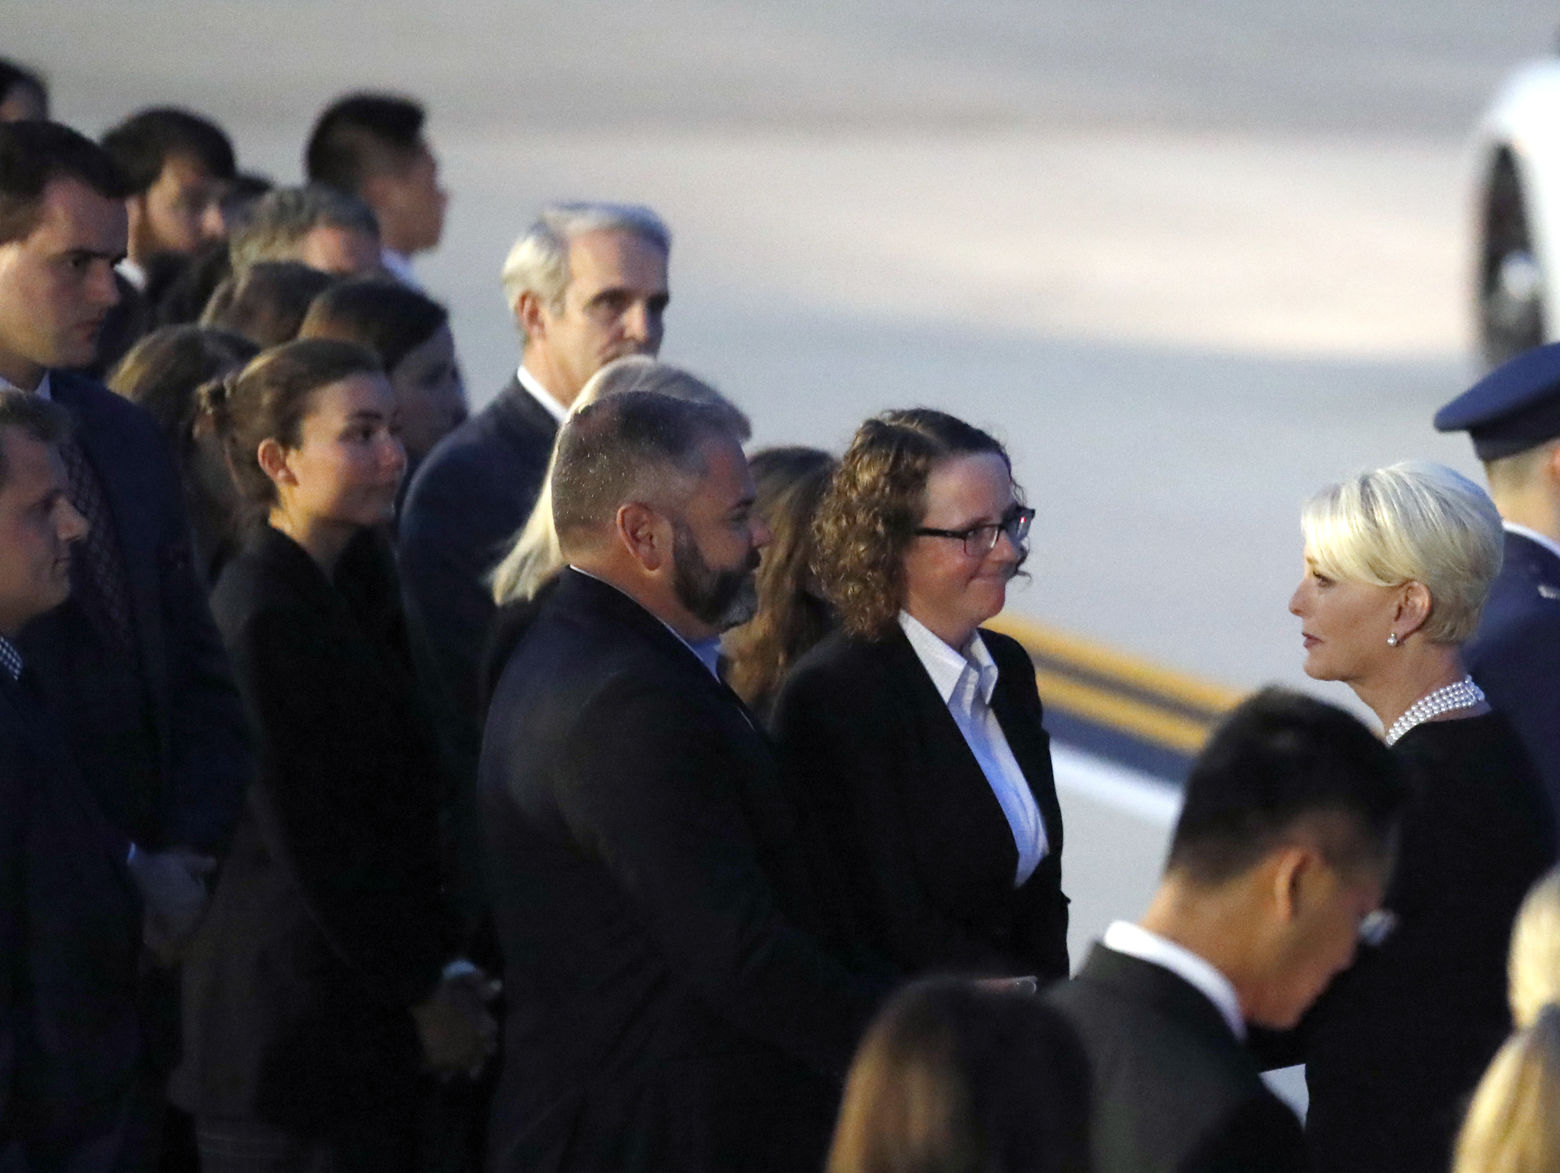 Cindy McCain, right, the wife of Sen. John McCain, R-Ariz., greets current and former staff members of McCain, Thursday, Aug. 30, 2018, at Andrews Air Force Base, Md. (AP Photo/Alex Brandon)